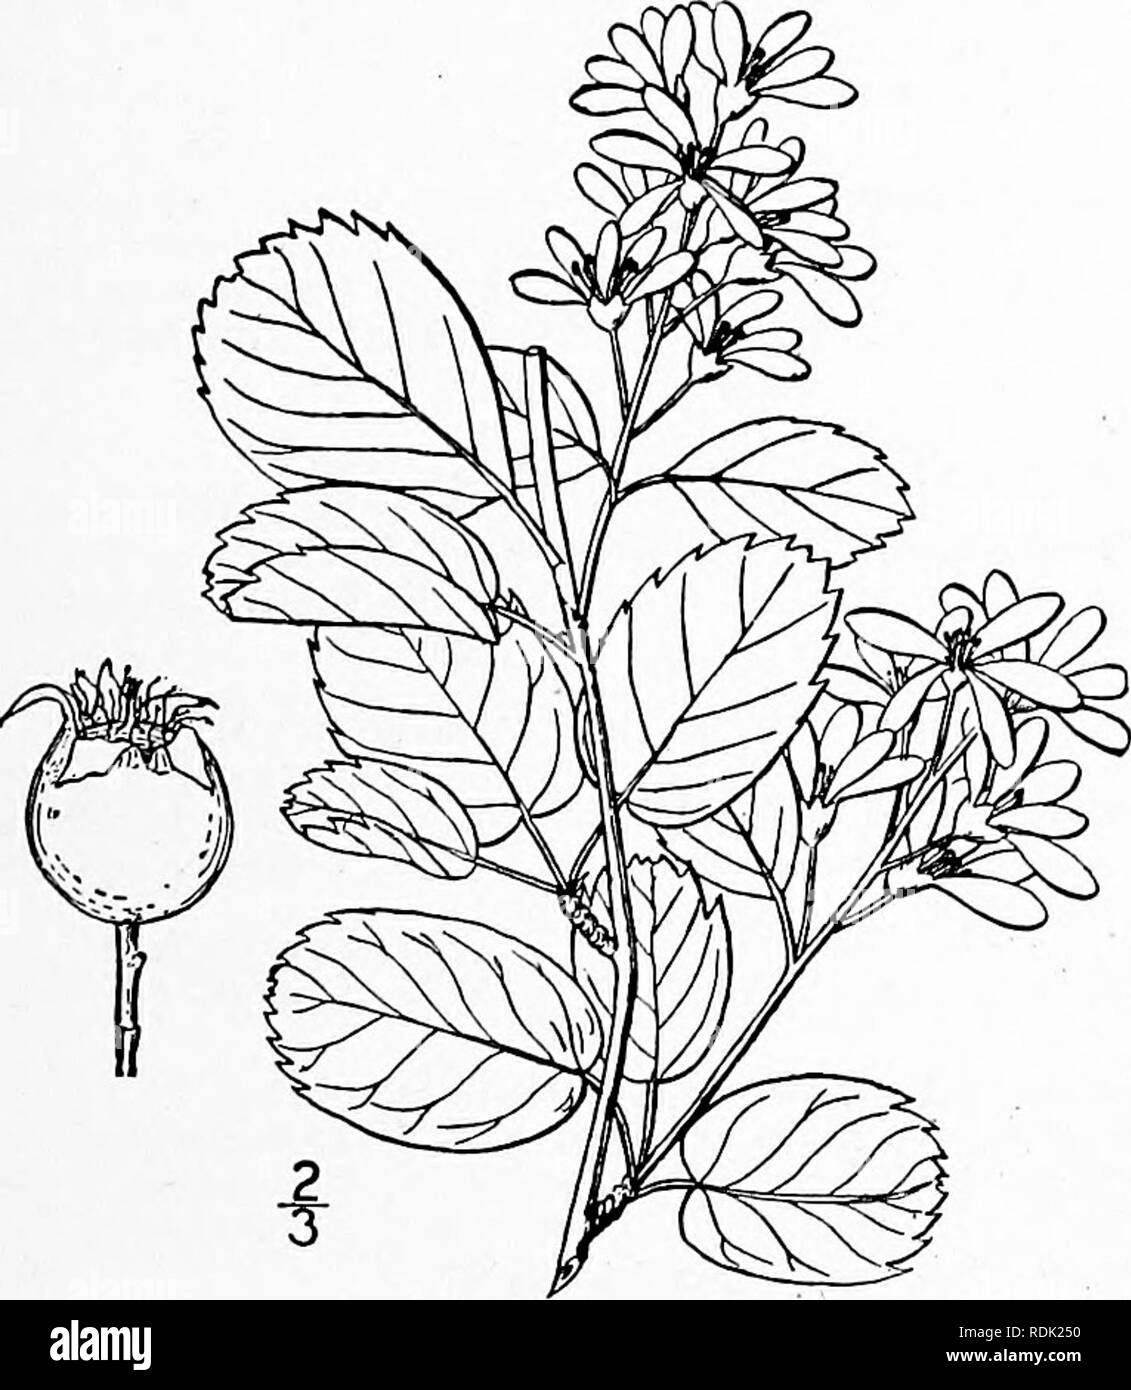 . An illustrated flora of the northern United States, Canada and the British possessions, from Newfoundland to the parallel of the southern boundary of Virginia, and from the Atlantic Ocean westward to the 102d meridian. Botany; Botany. Genus 5. APPLE FAMILY, 4. Amelanchier sanguinea (Pursh) DC, Round-leaved June-berry. Fig. 2332. Mespilus canadensis var. rotundifolia Michx, Fl. Bor. Am. i : 291. 1803. Pyrus sangtiinea Pursh. Fl. Am. Sept. 340. 1814. A. sanguinea DC. Prodr. 2 : 633. 1825. A, rotundifolia Roem. Syn. Mon. 3 : 146. 1847. A tall shrub or small tree, sometimes 25° high. Leaves broa Stock Photo